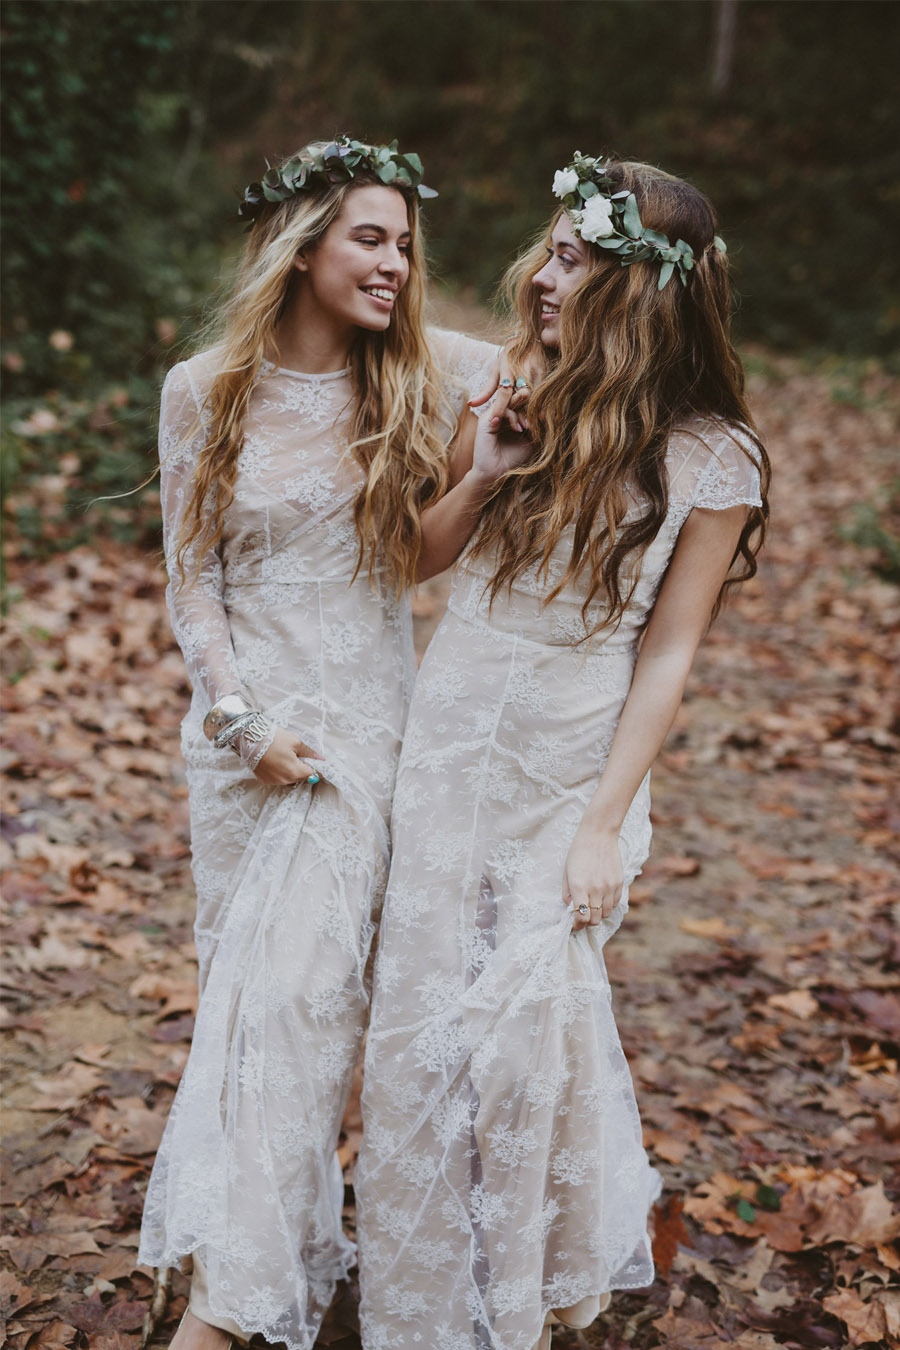 Wedding Dresses Bohemian Best 10 - Find the Perfect Venue for Your ...